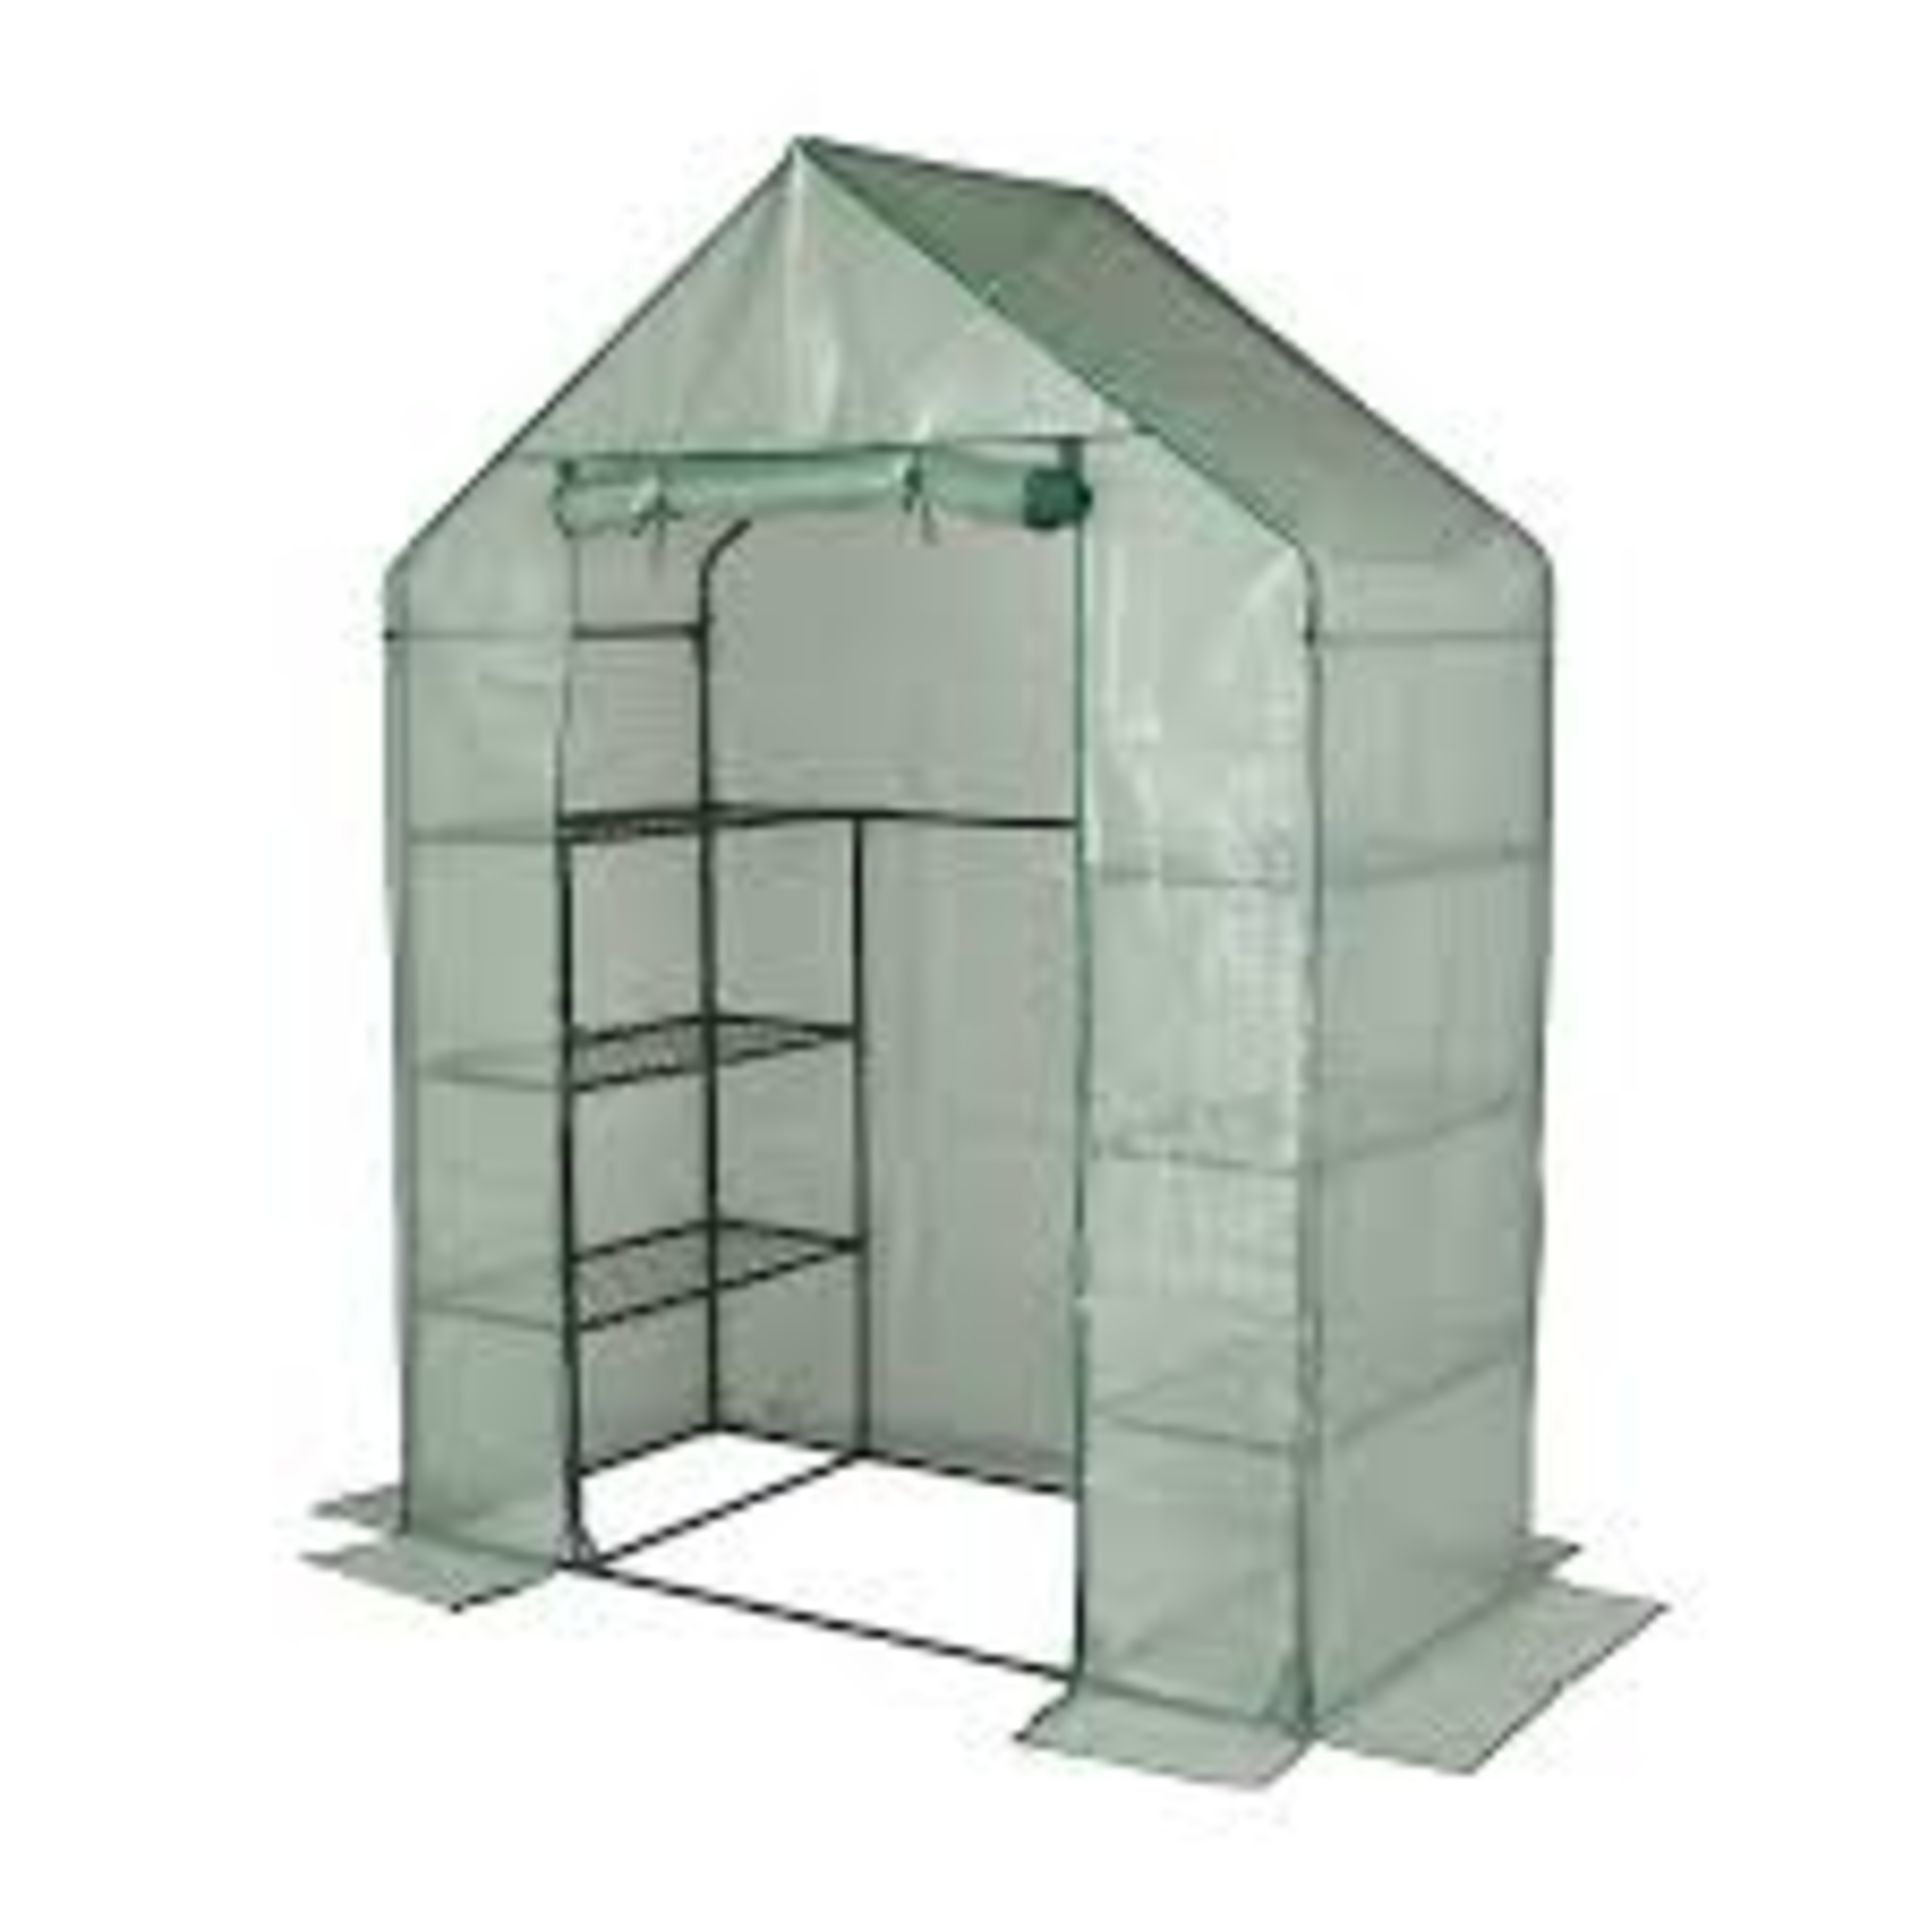 Plastic 1m² Growhouse. - P6. This flexible greenhouse provides a space for vegetables to grow all